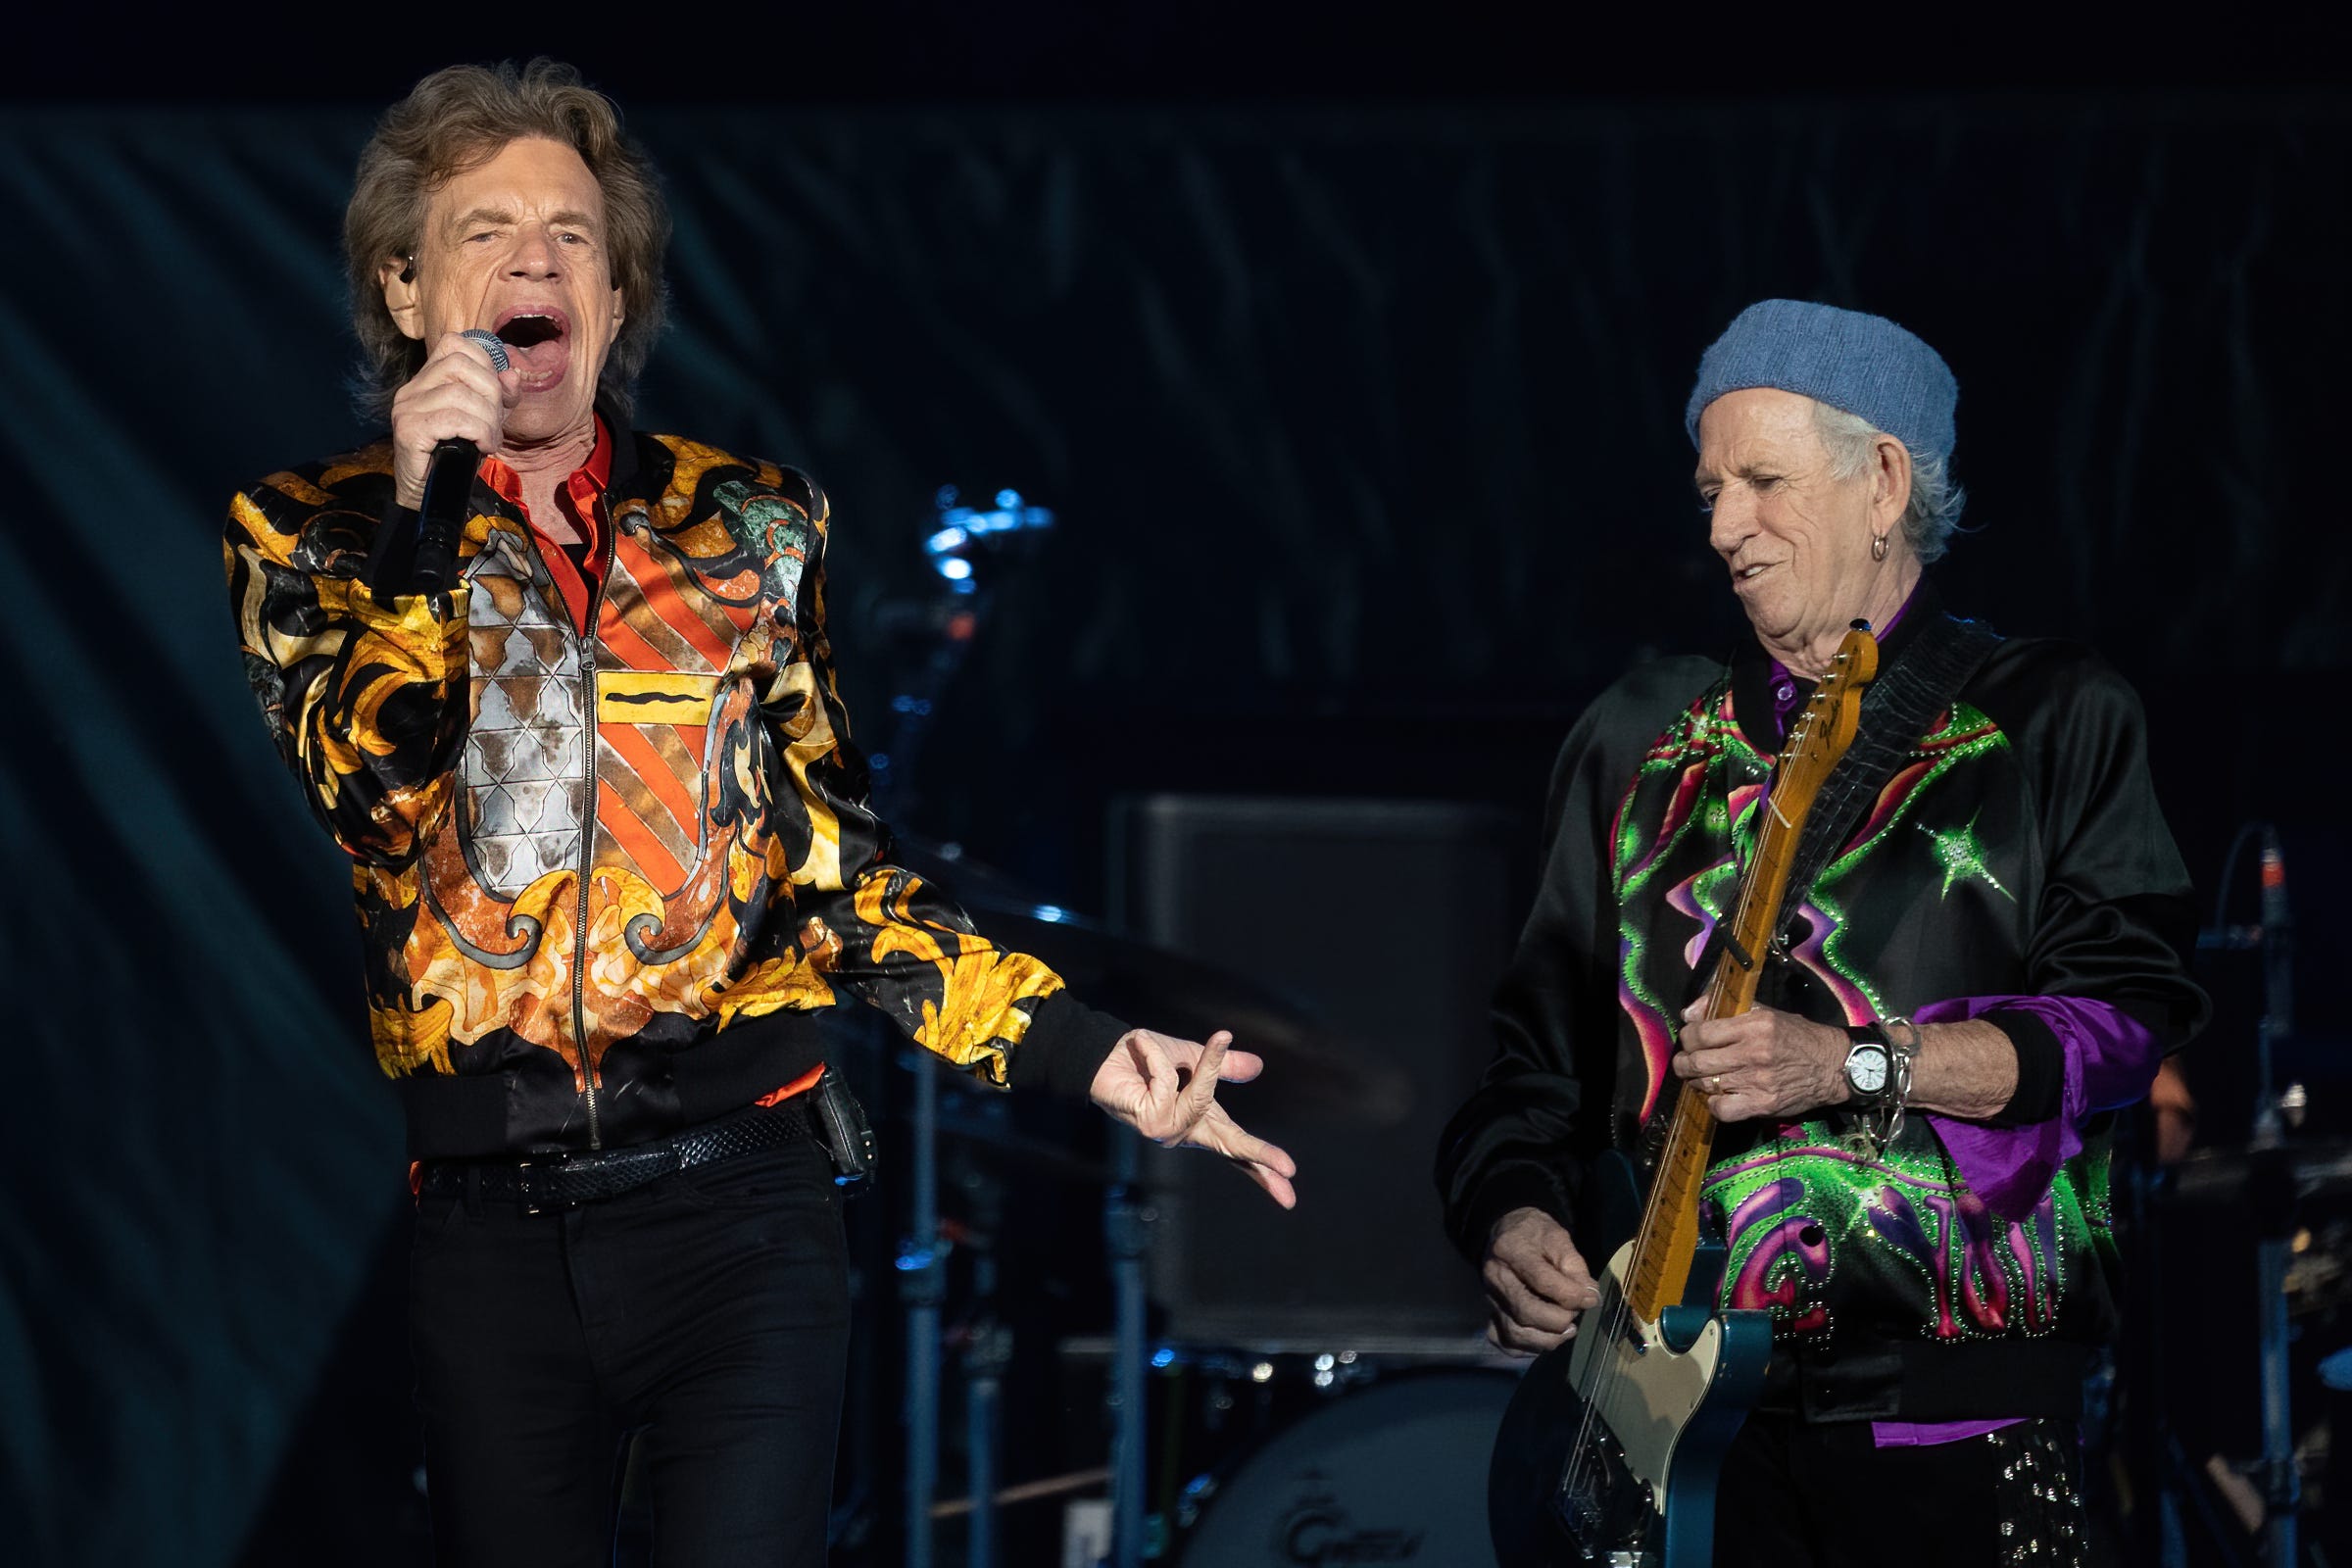 Mick Jagger and Keith Richards of the Rolling Stones perform at Circuit of the Americas on Nov. 20, 2021. in Austin, Texas.